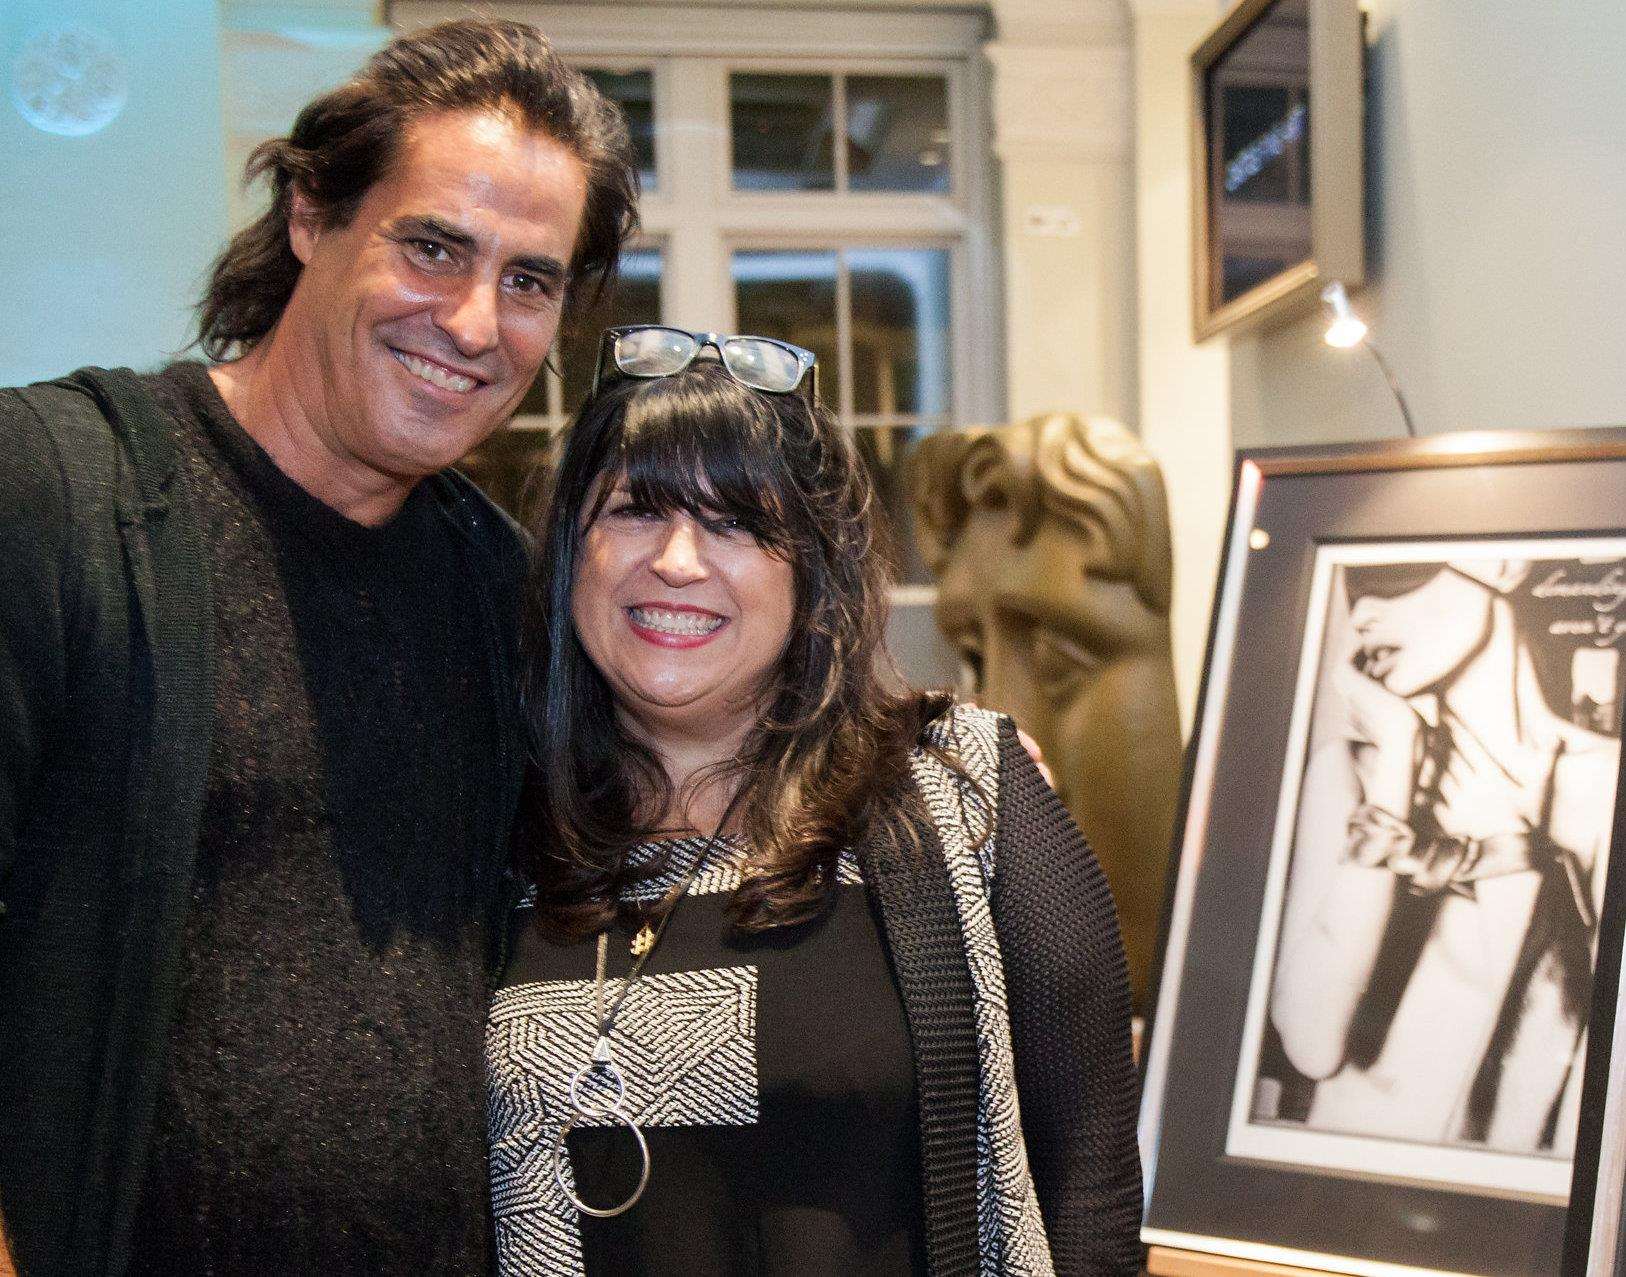 Photographer turned artist Raphael Mazzucco presents a Fifty Shades of Grey art collection at Bluewater with author E.L. James